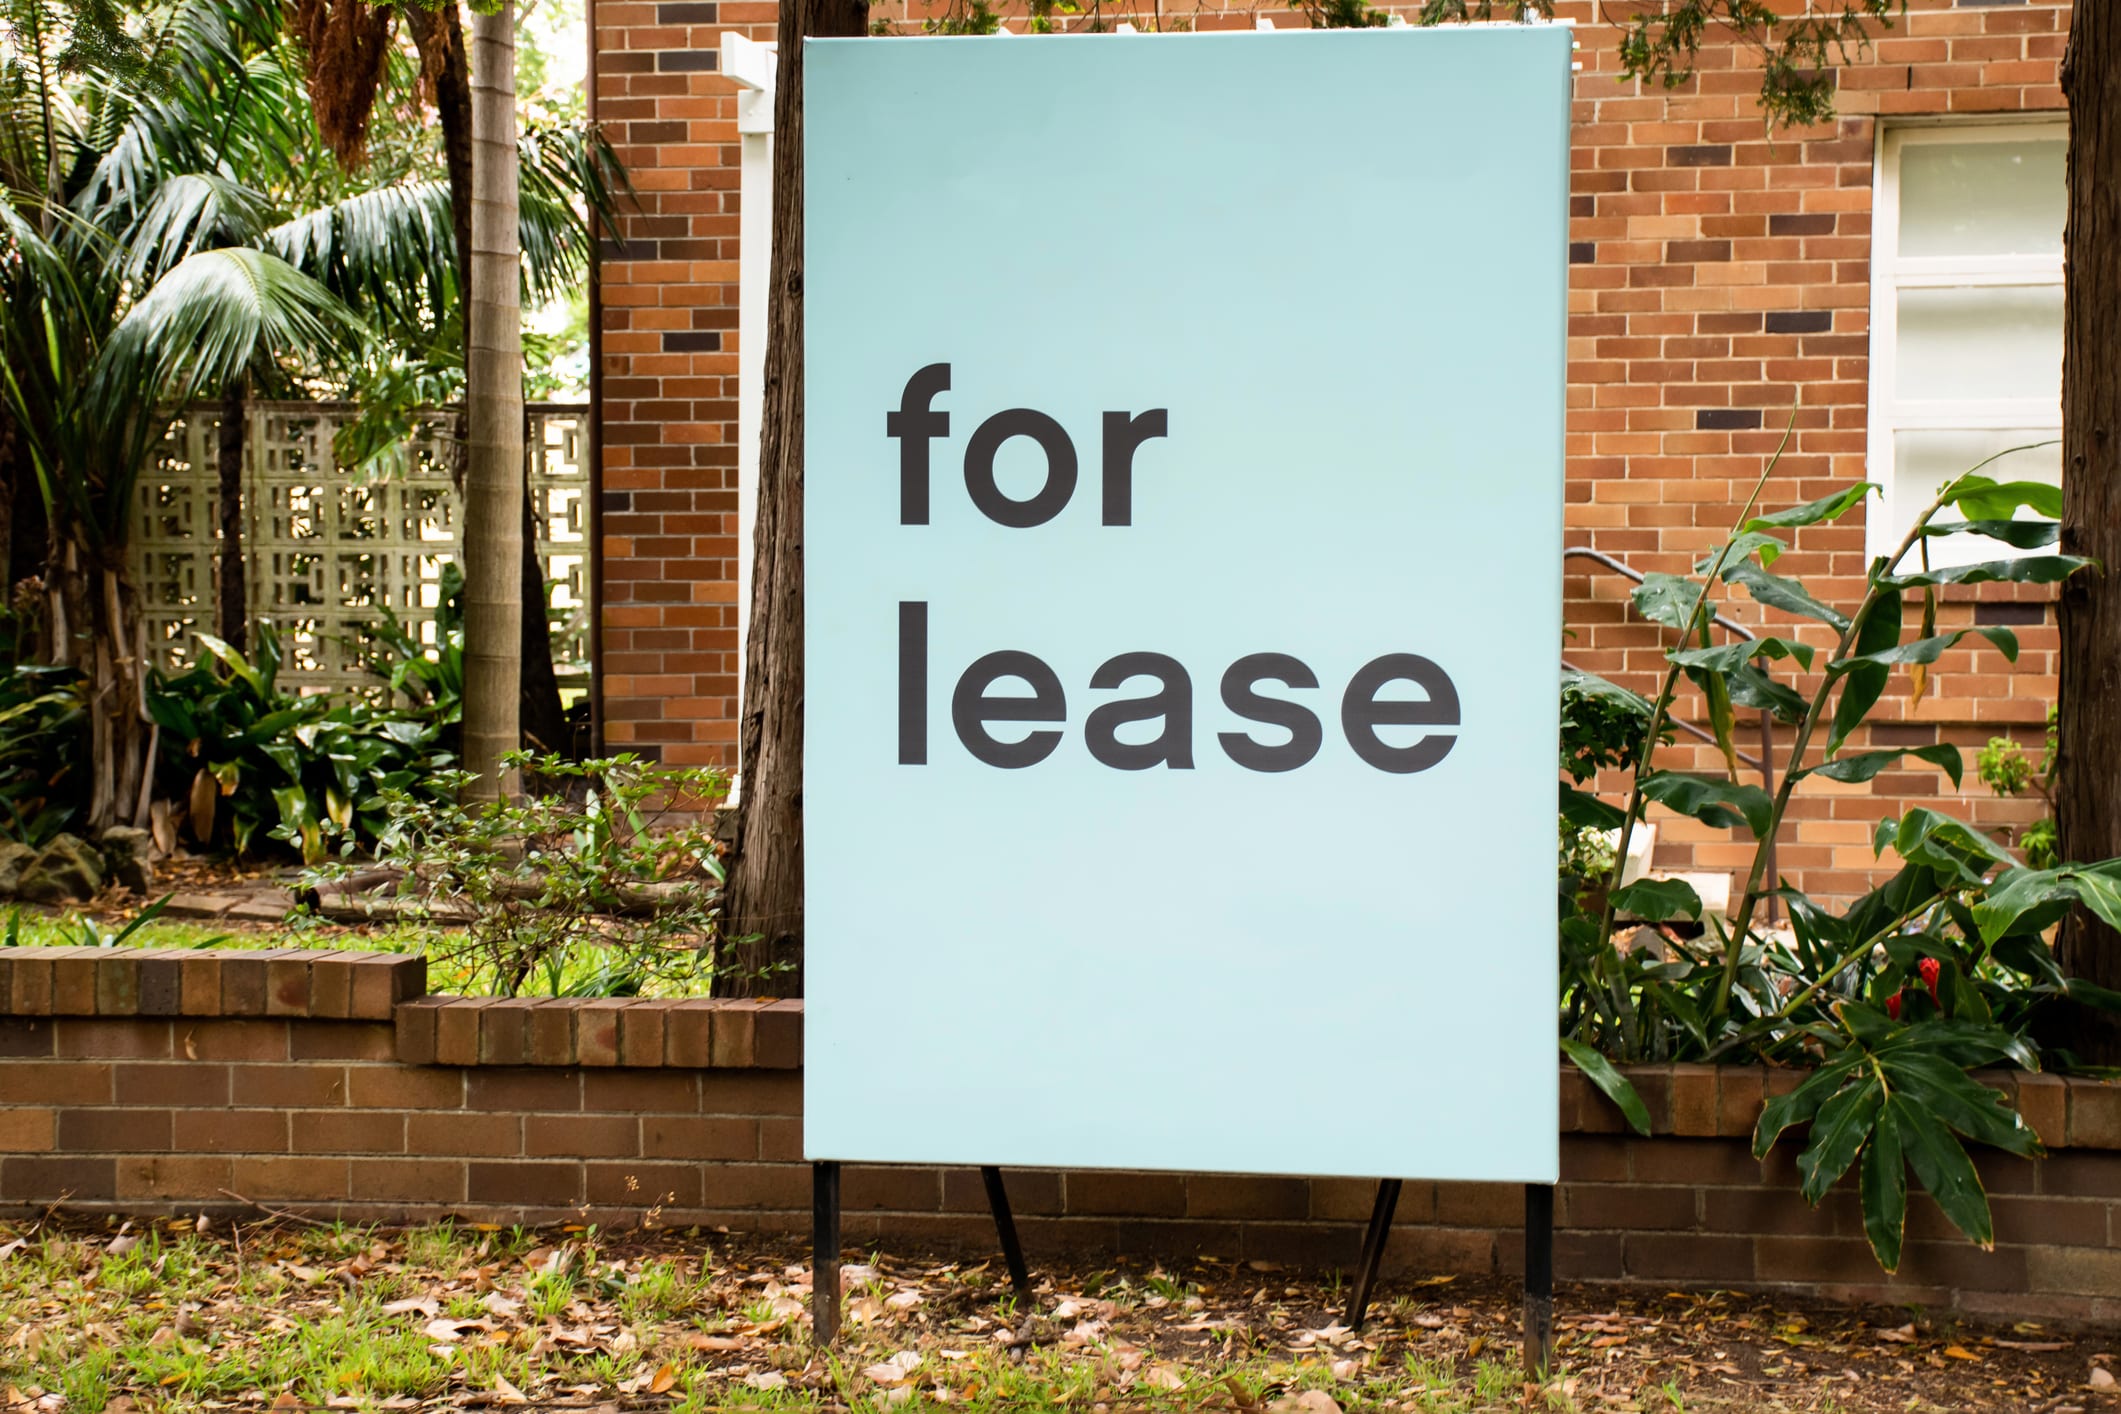 US rents are falling and the reasons why could spell good news for Australian renters